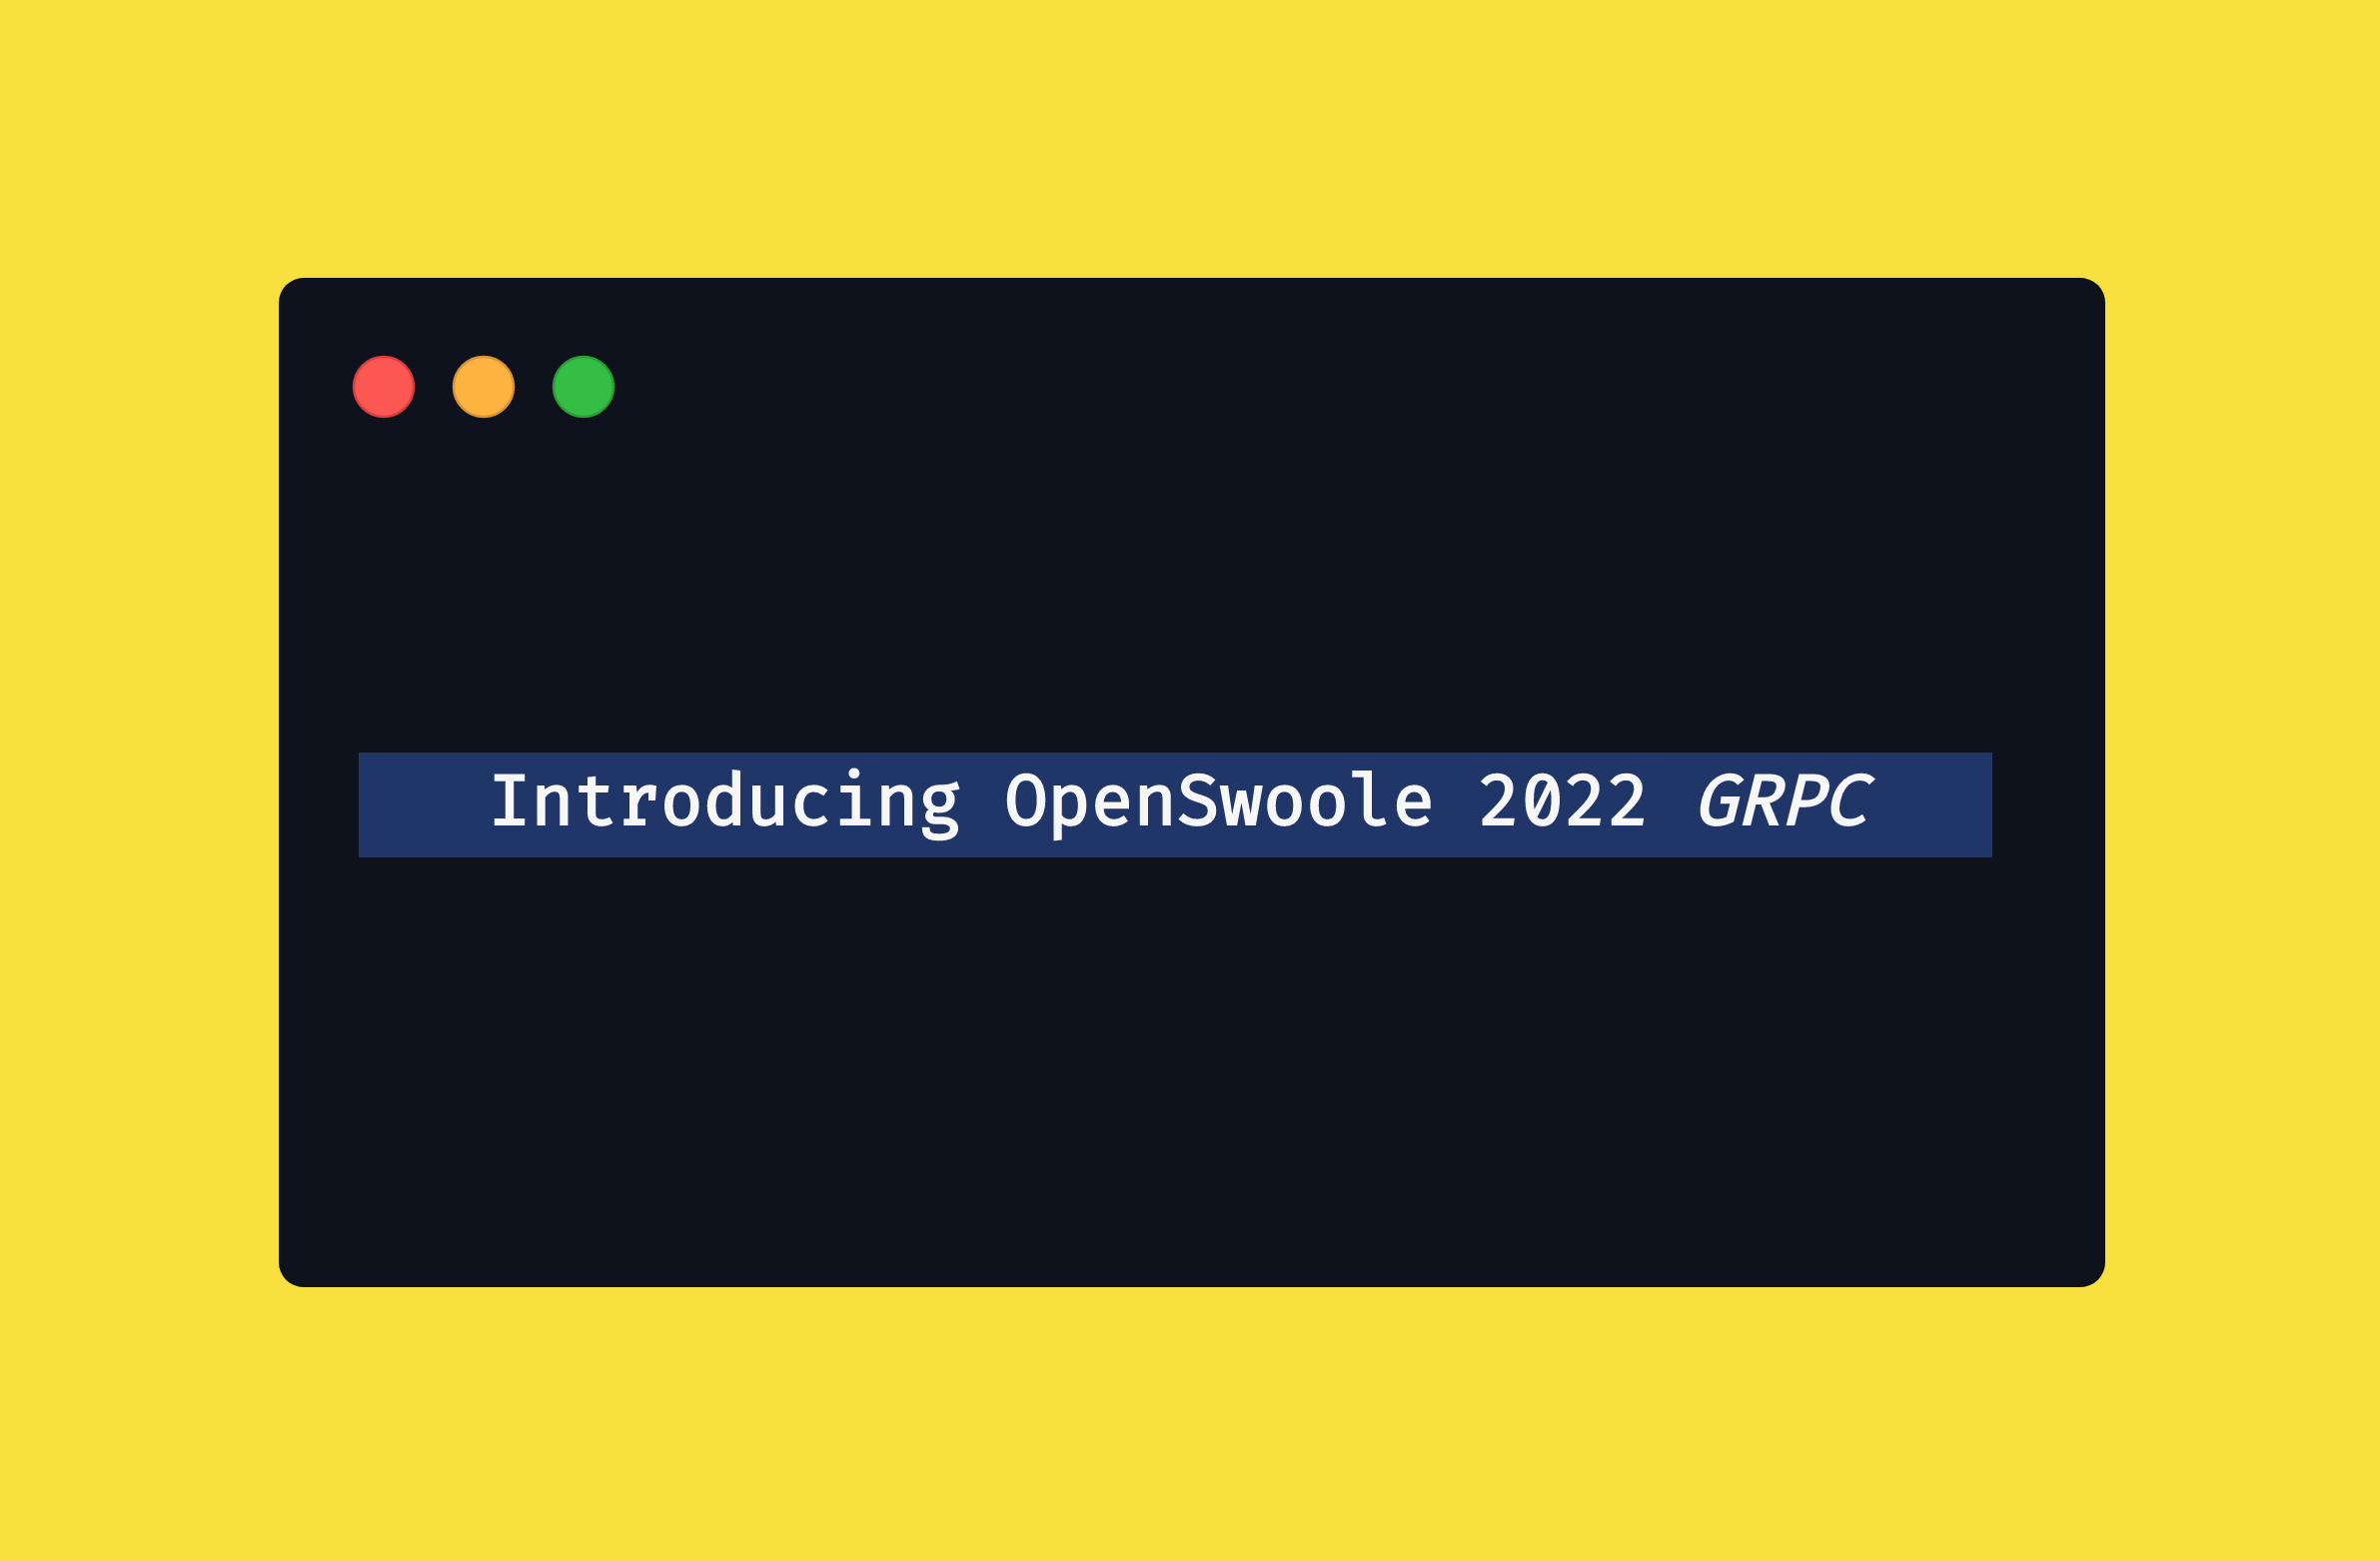 Introducing OpenSwoole 2022 GRPC